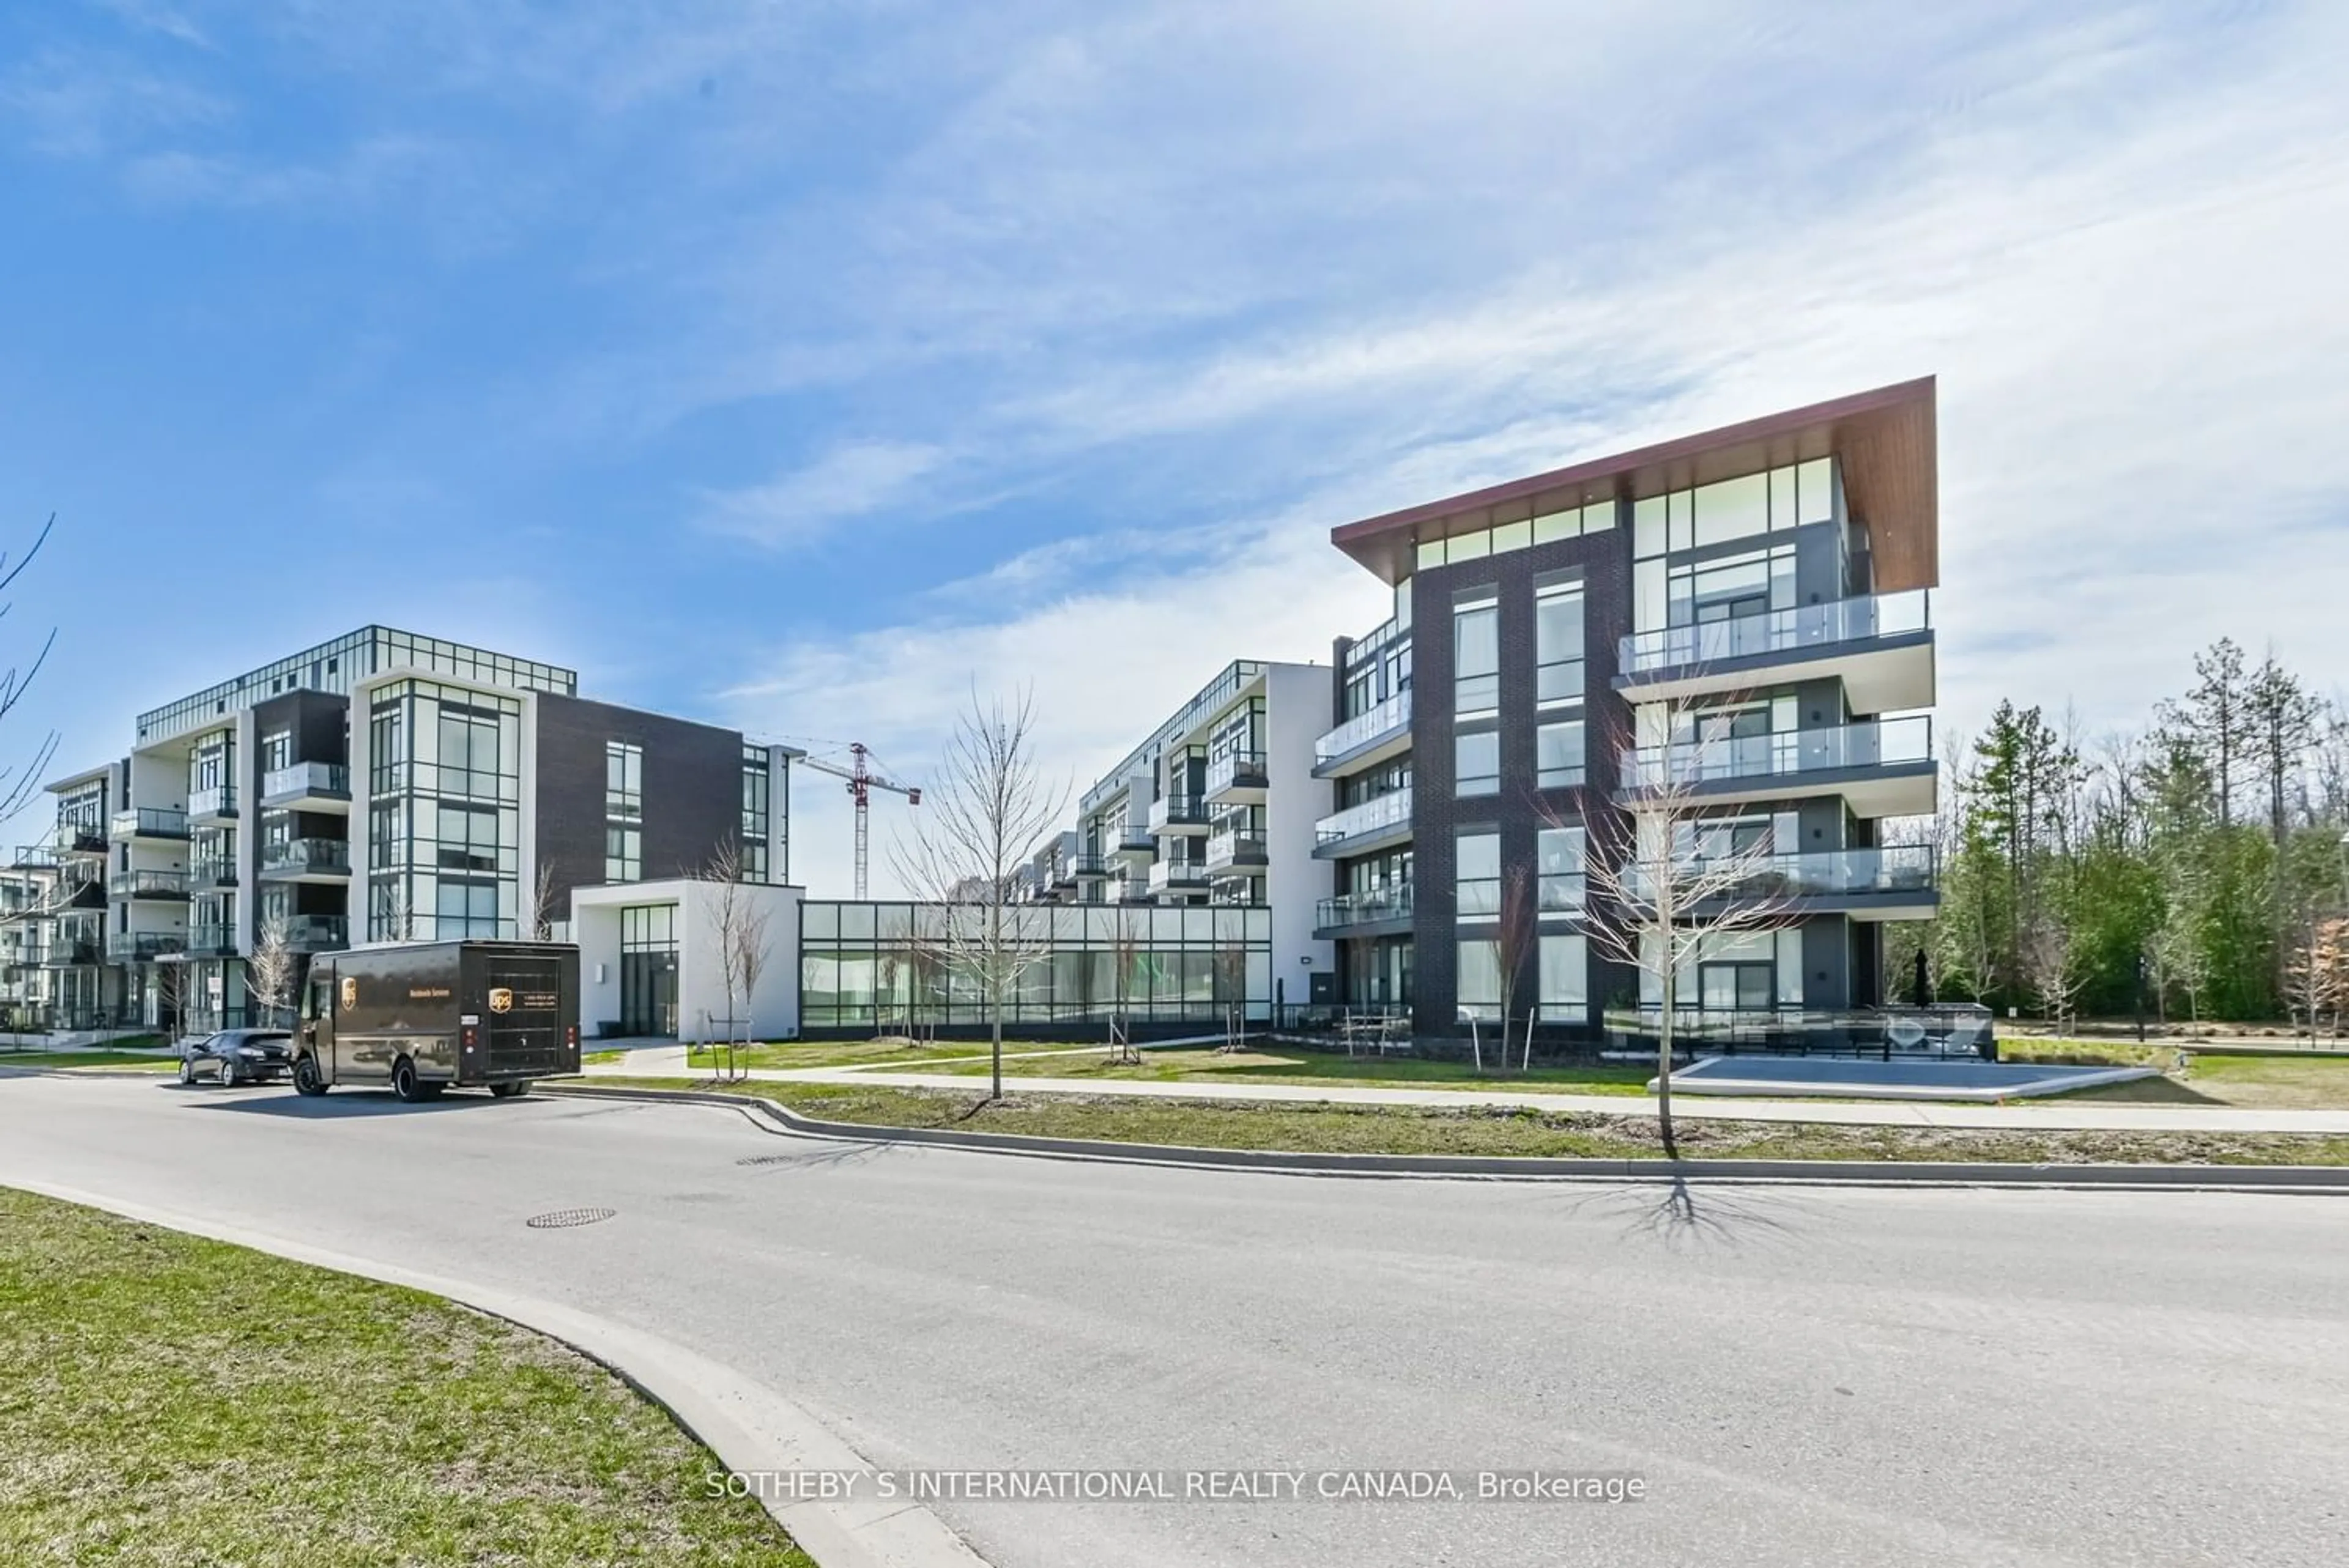 A pic from exterior of the house or condo for 415 Sea Ray Ave #350, Innisfil Ontario L9S 0R5